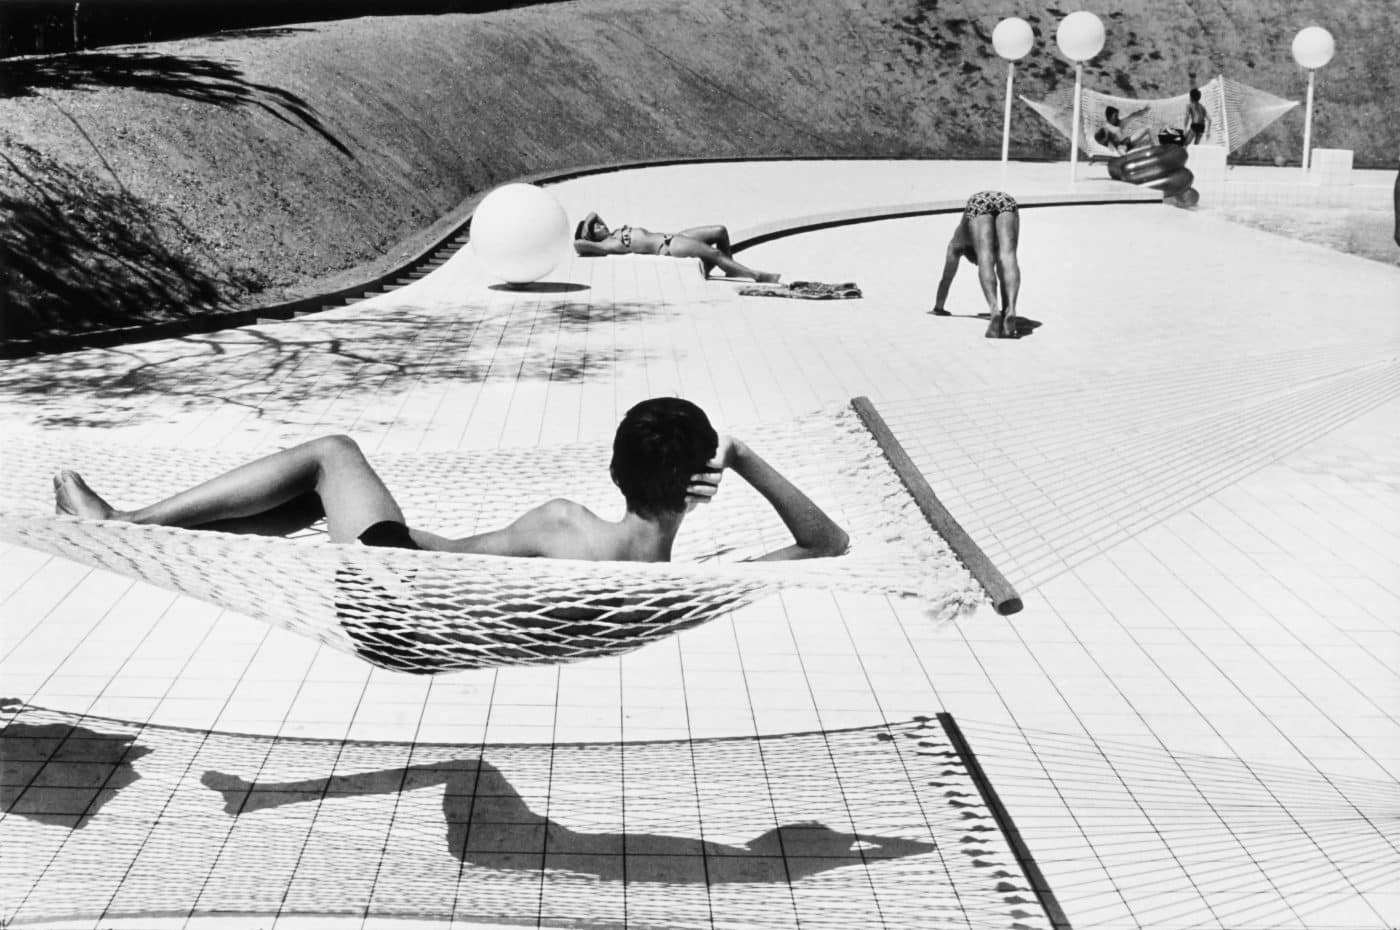 Swimming Pool Designed by Alain Capeilleres, Le Brusc, Var, France, 1976, by Martine Franck